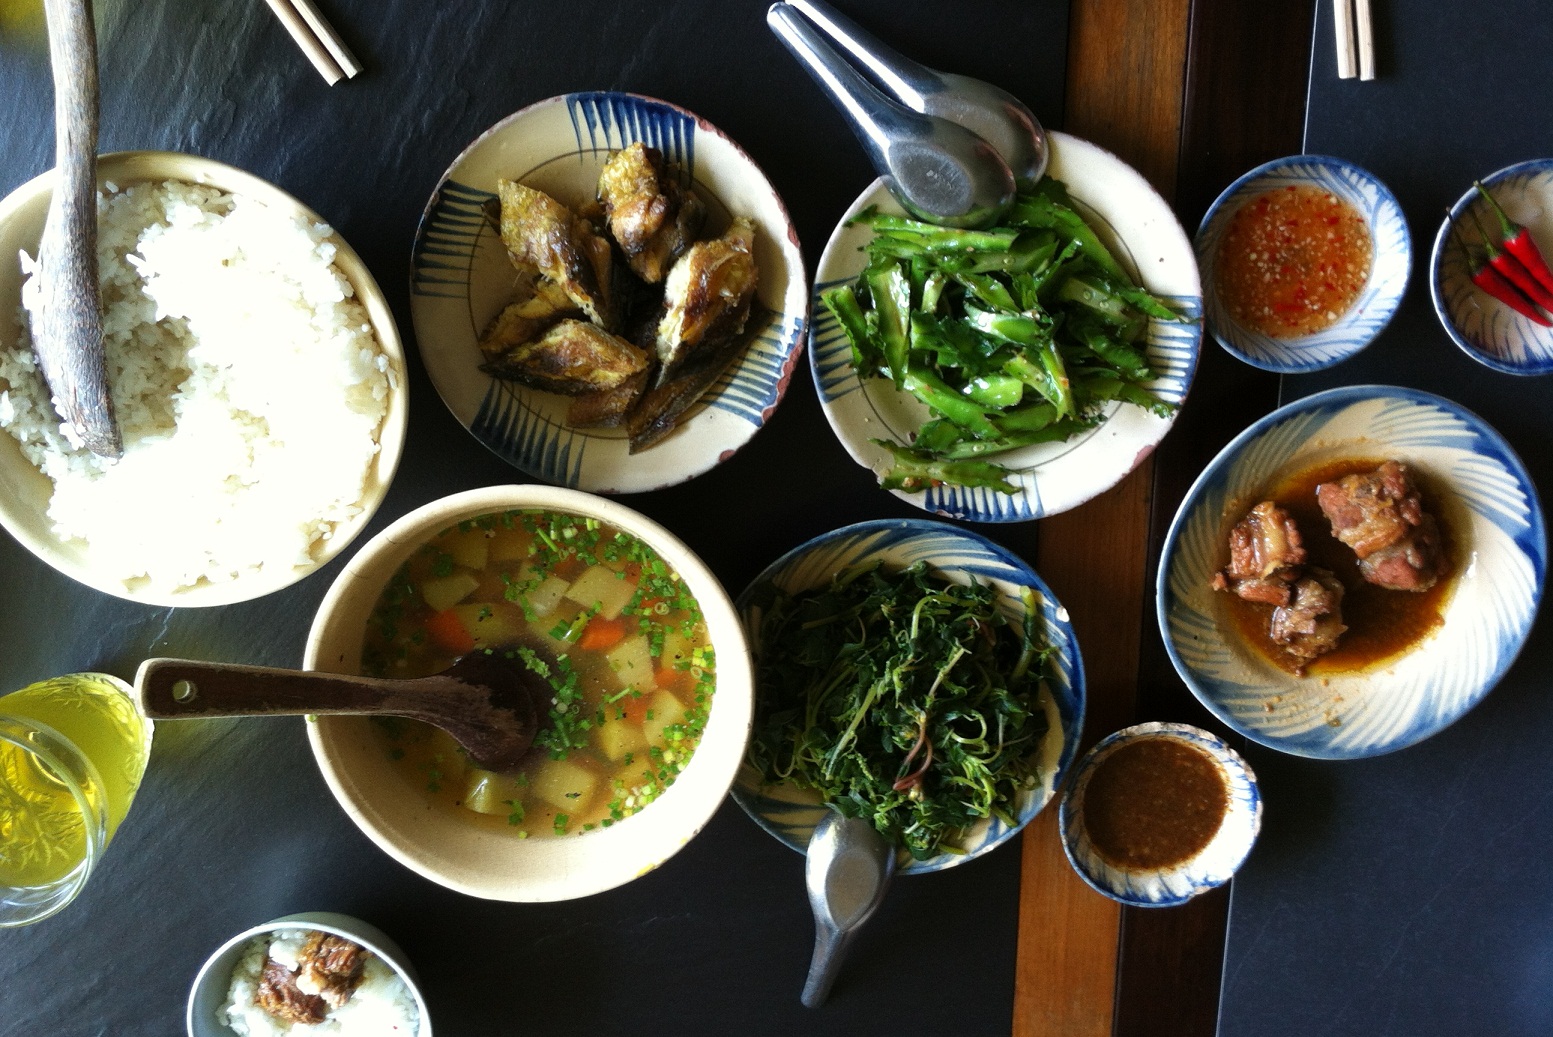 Simple meal of Vietnamese family in rural area